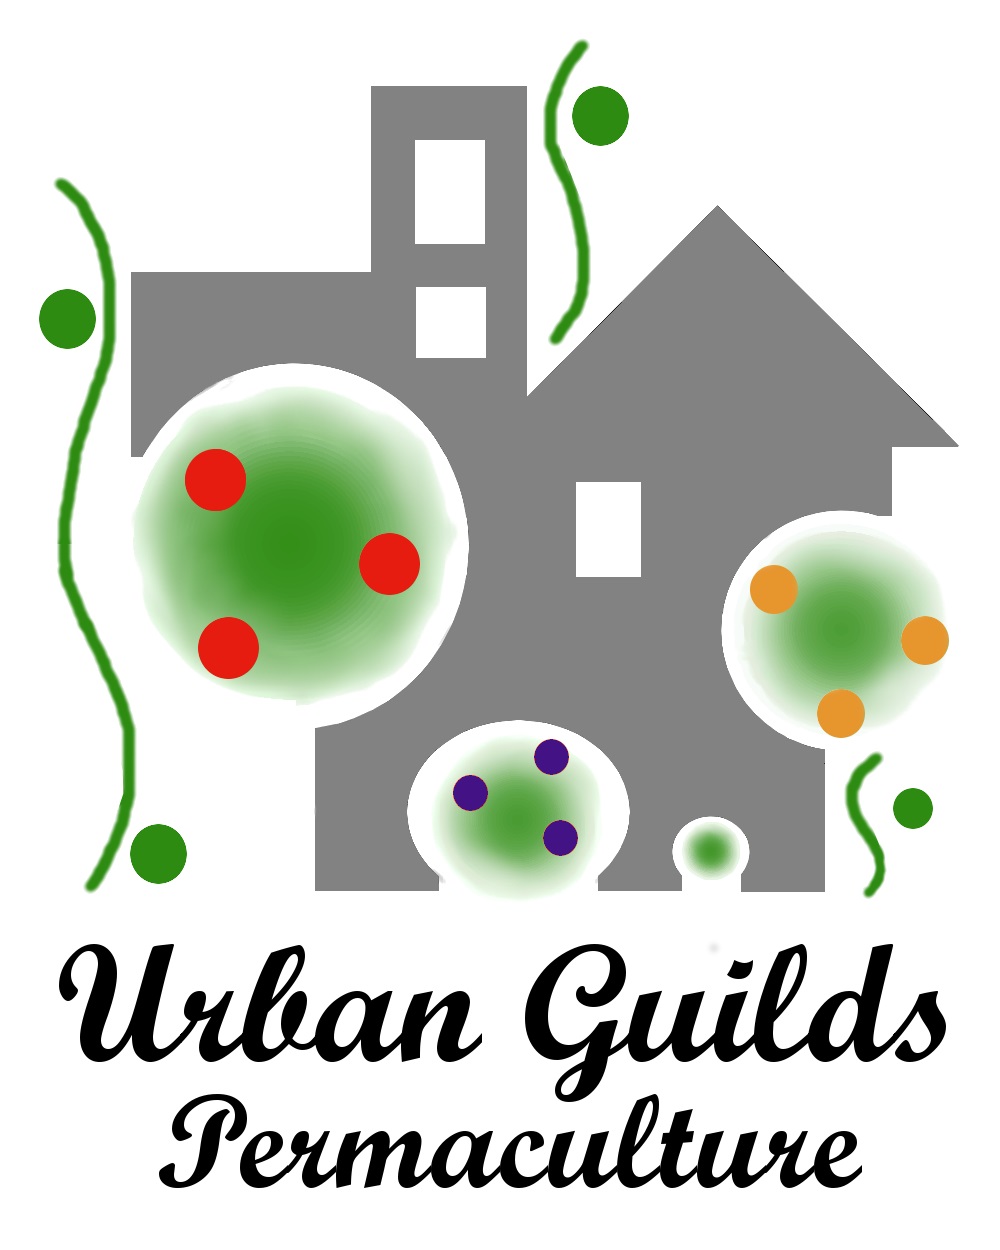 Urban Guilds Permaculture